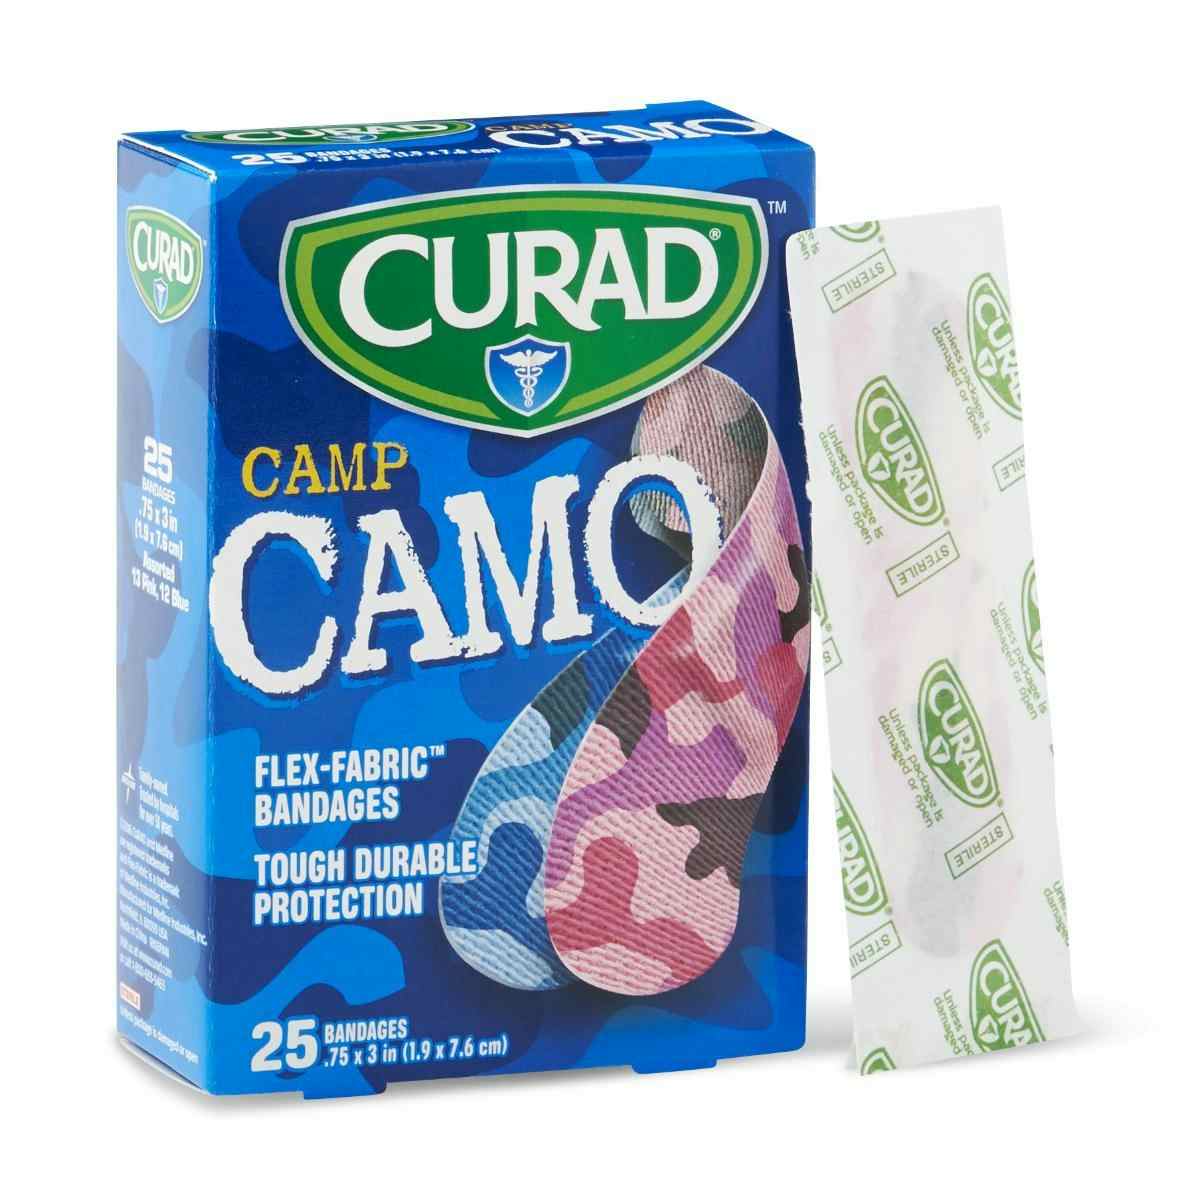 Curad Camp Camo Flex-Fabric Adhesive Bandages, CUR45702RB, Pink - 3/4" X 3" - Case of 24